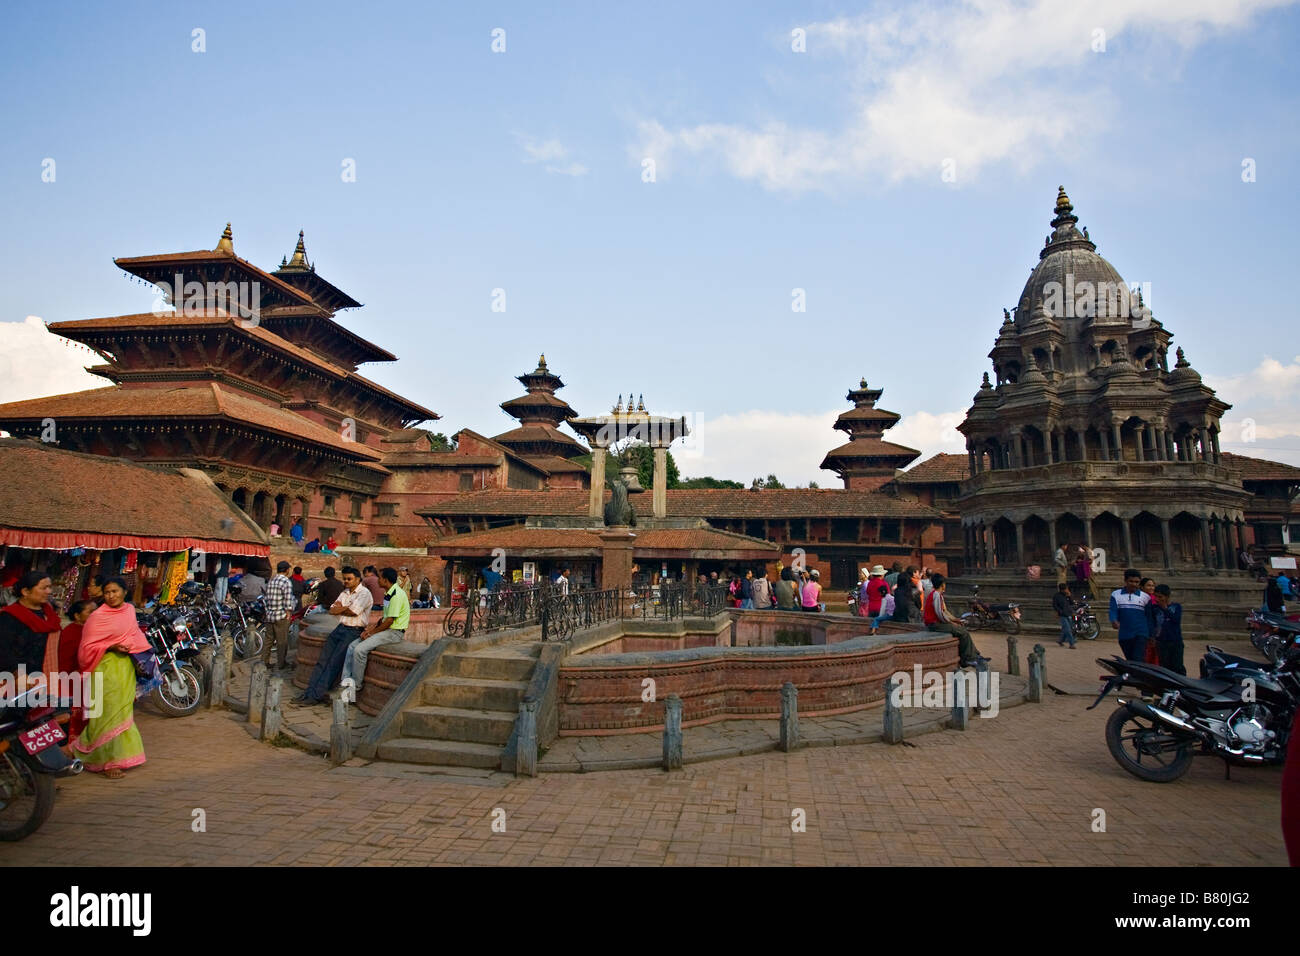 Chyasin Dewal on the right side, Durbar Square, Patan, Nepal, Asia Stock Photo